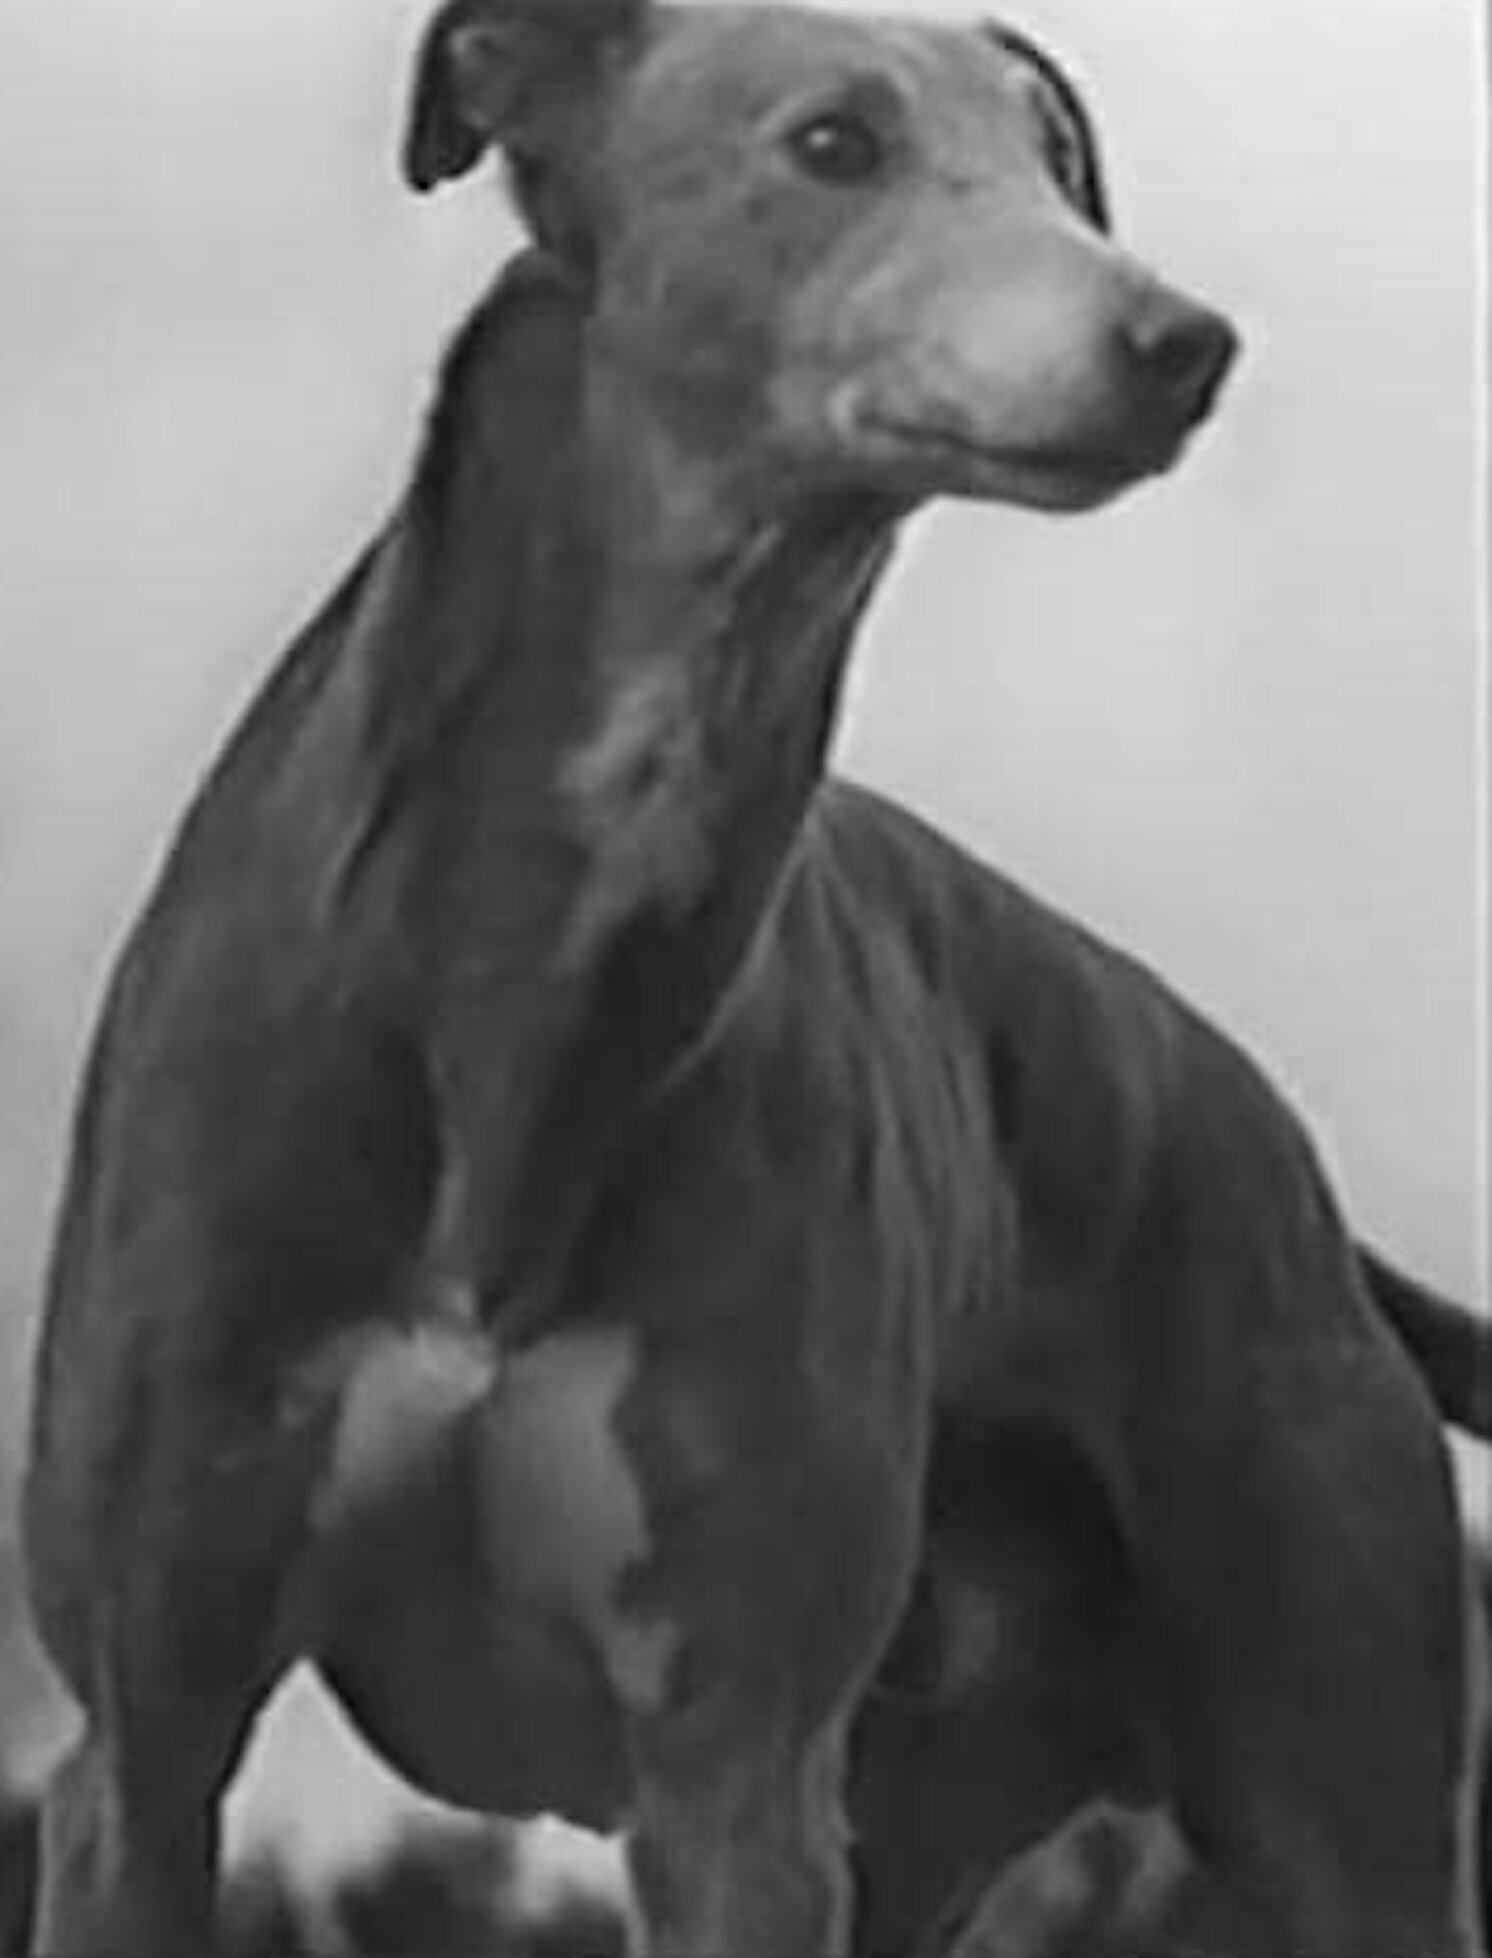 Empire Art Direct Weimaraner Black and White Pet Paintings on